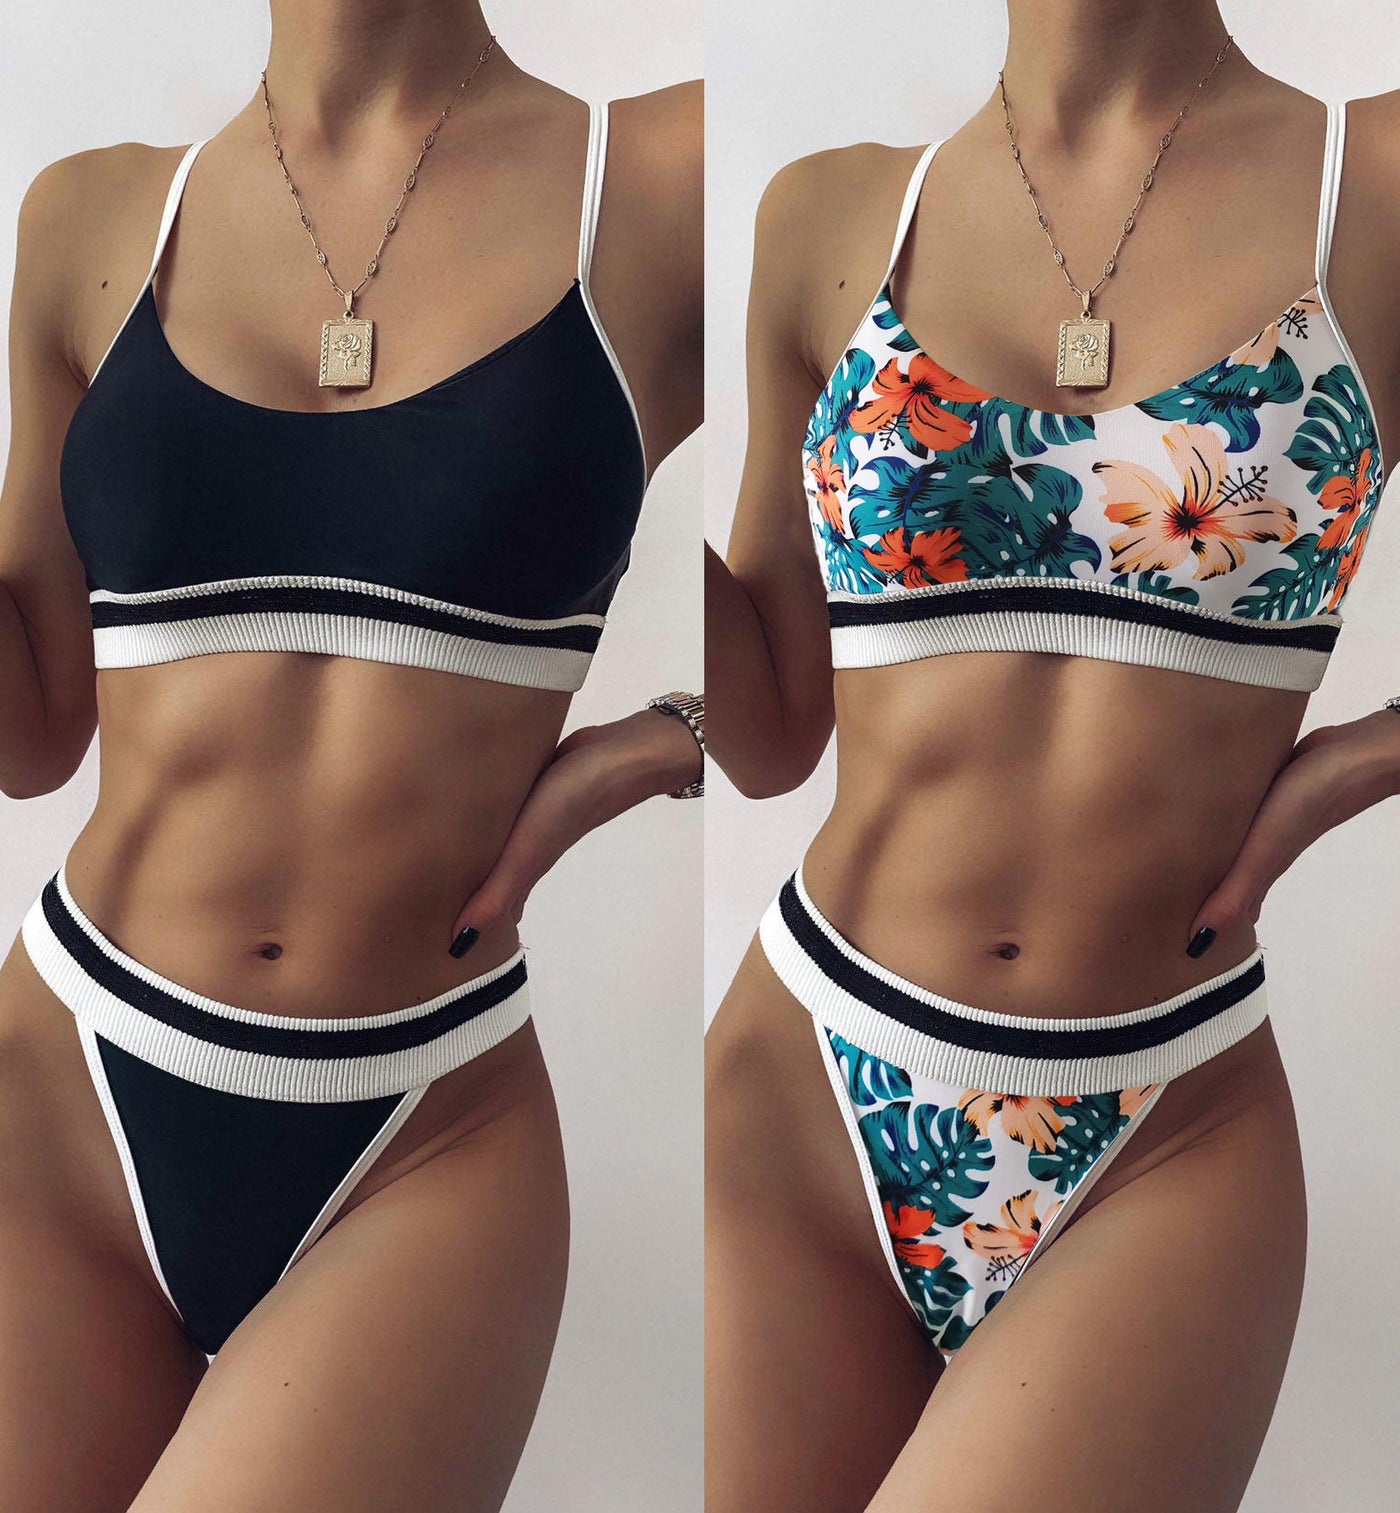 Solid Color Striped Swimsuit